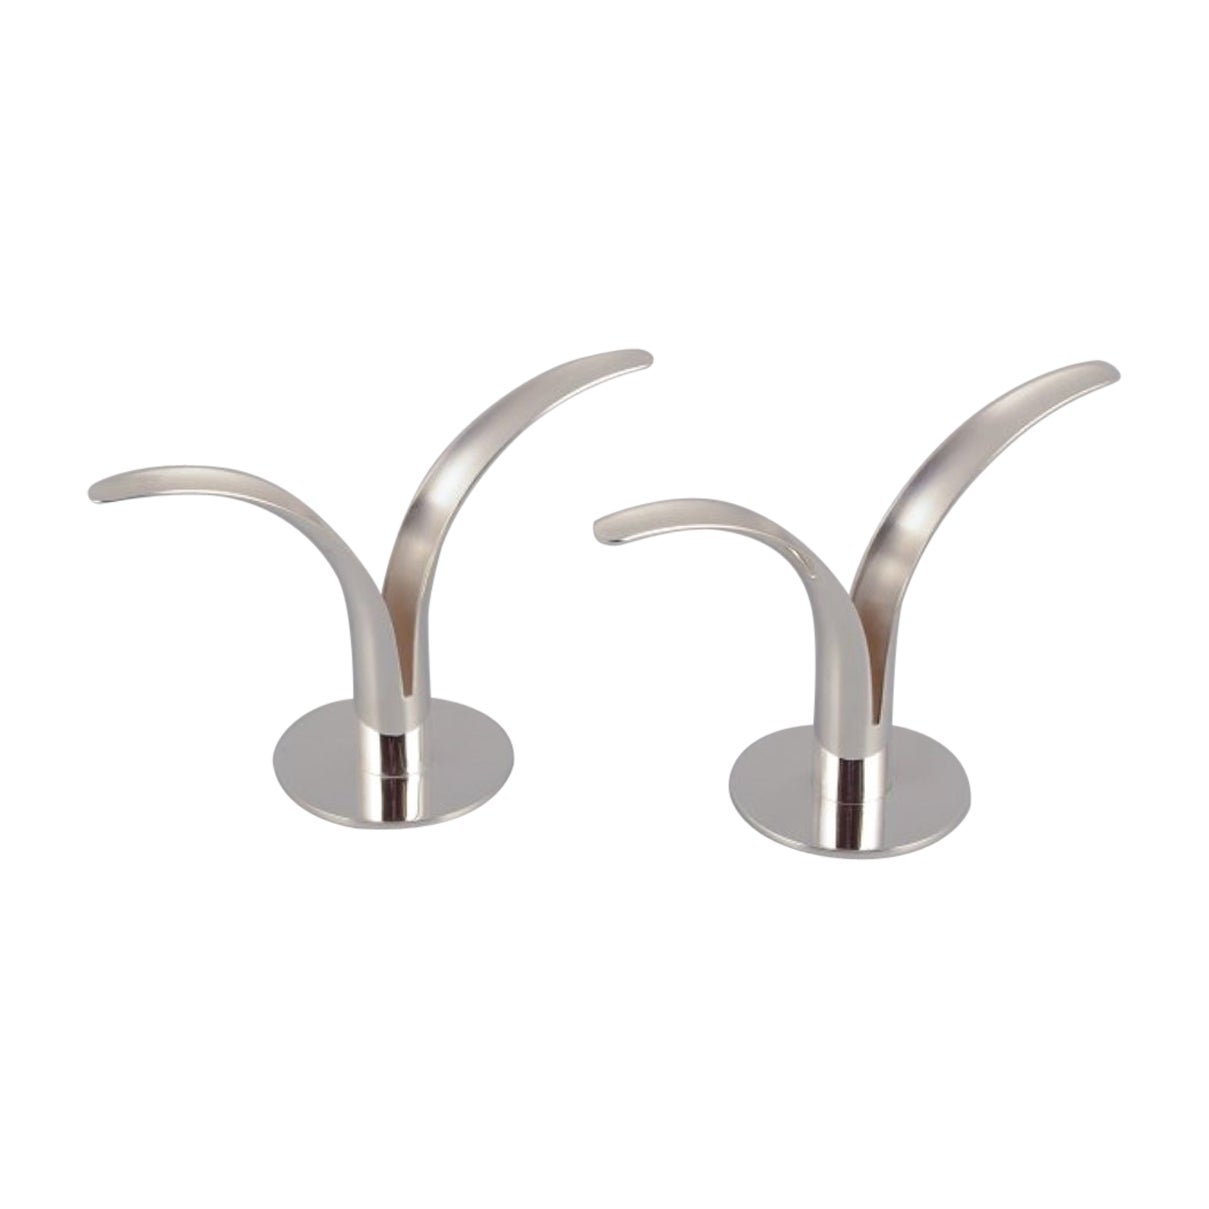  Skultuna, a pair of "Liljan" (Lilly) candle holders in plated silver. 